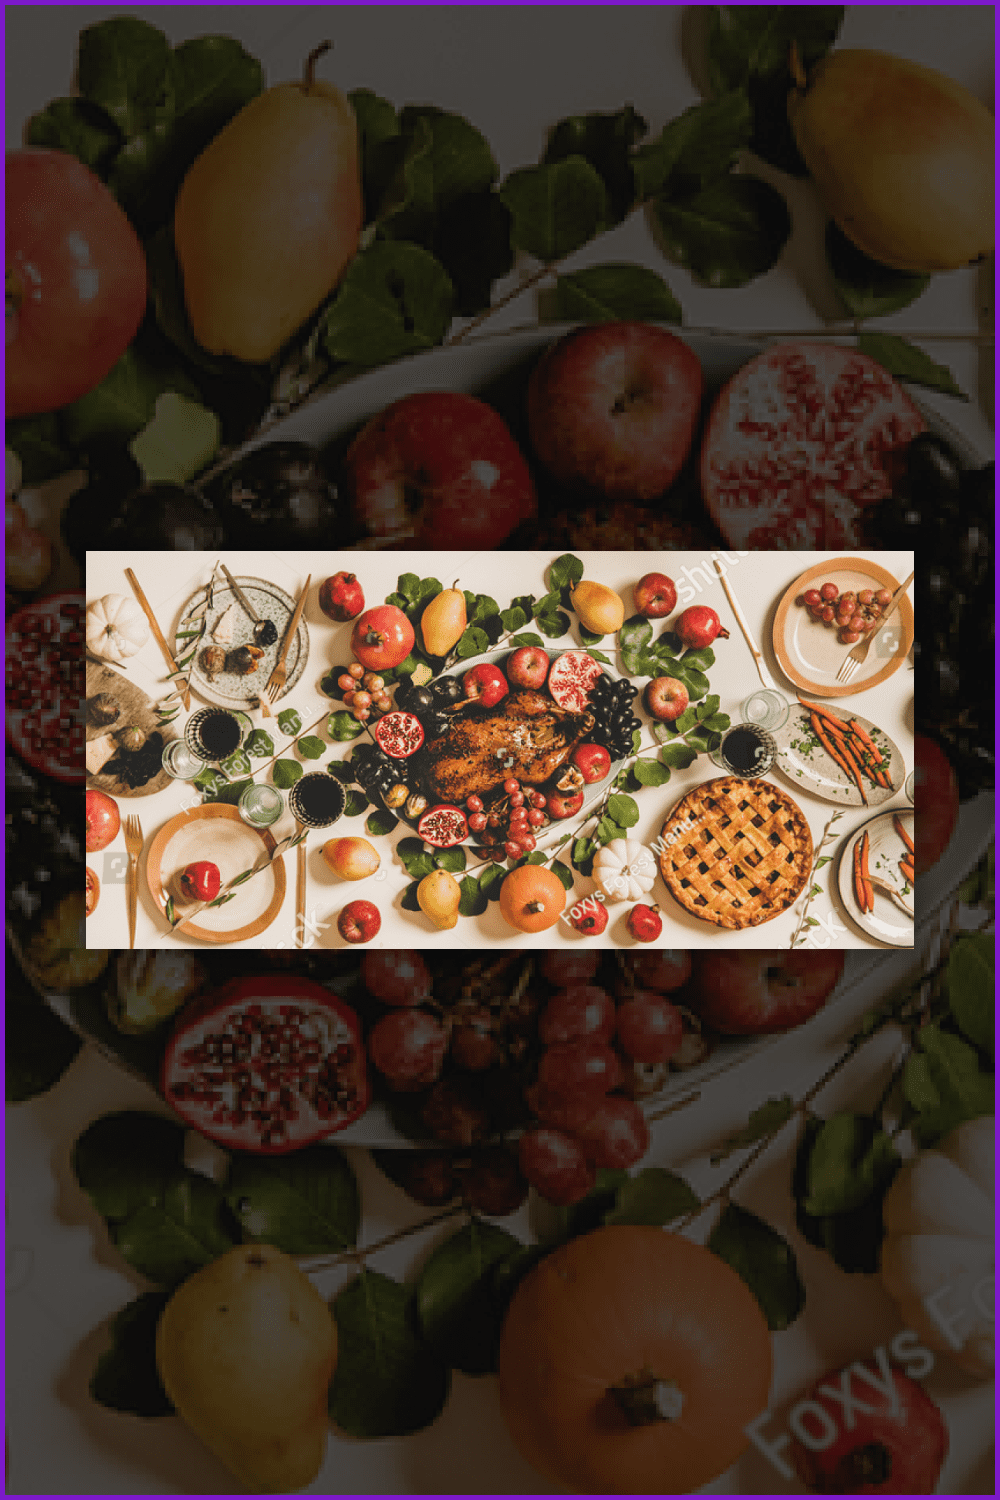 An image of roasted turkey, vegetables, cheese board, and apple pie with pumpkins, fruit, and leaves.